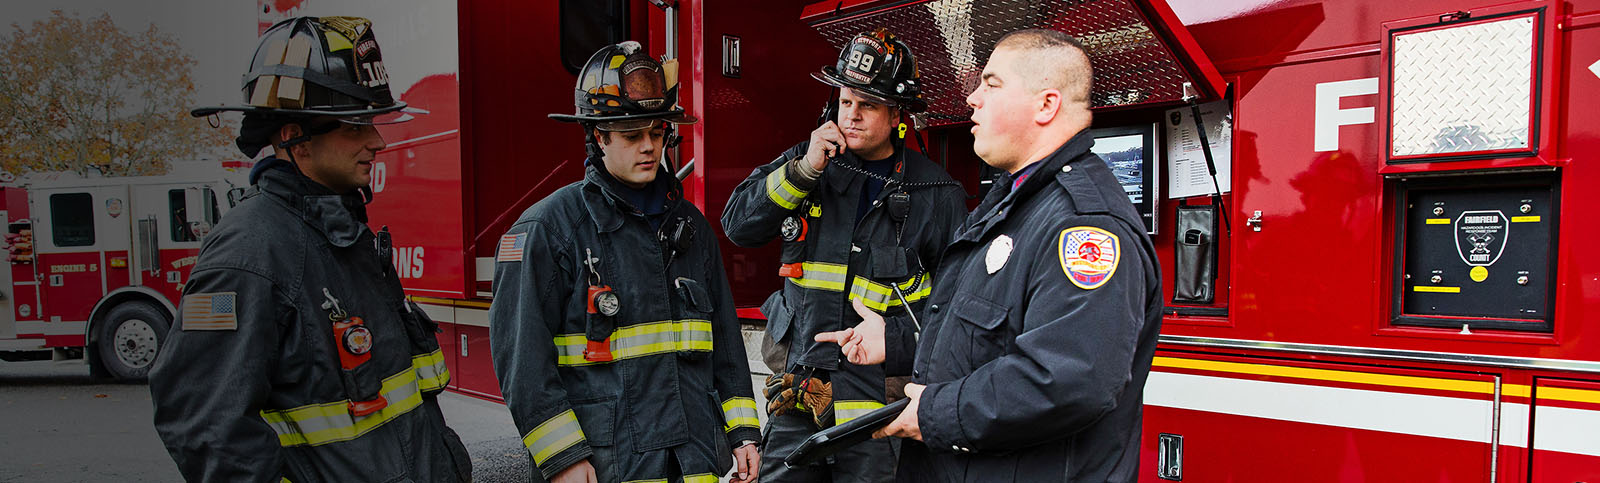 Four firefighters in uniform stand and talk by a firetruck.  